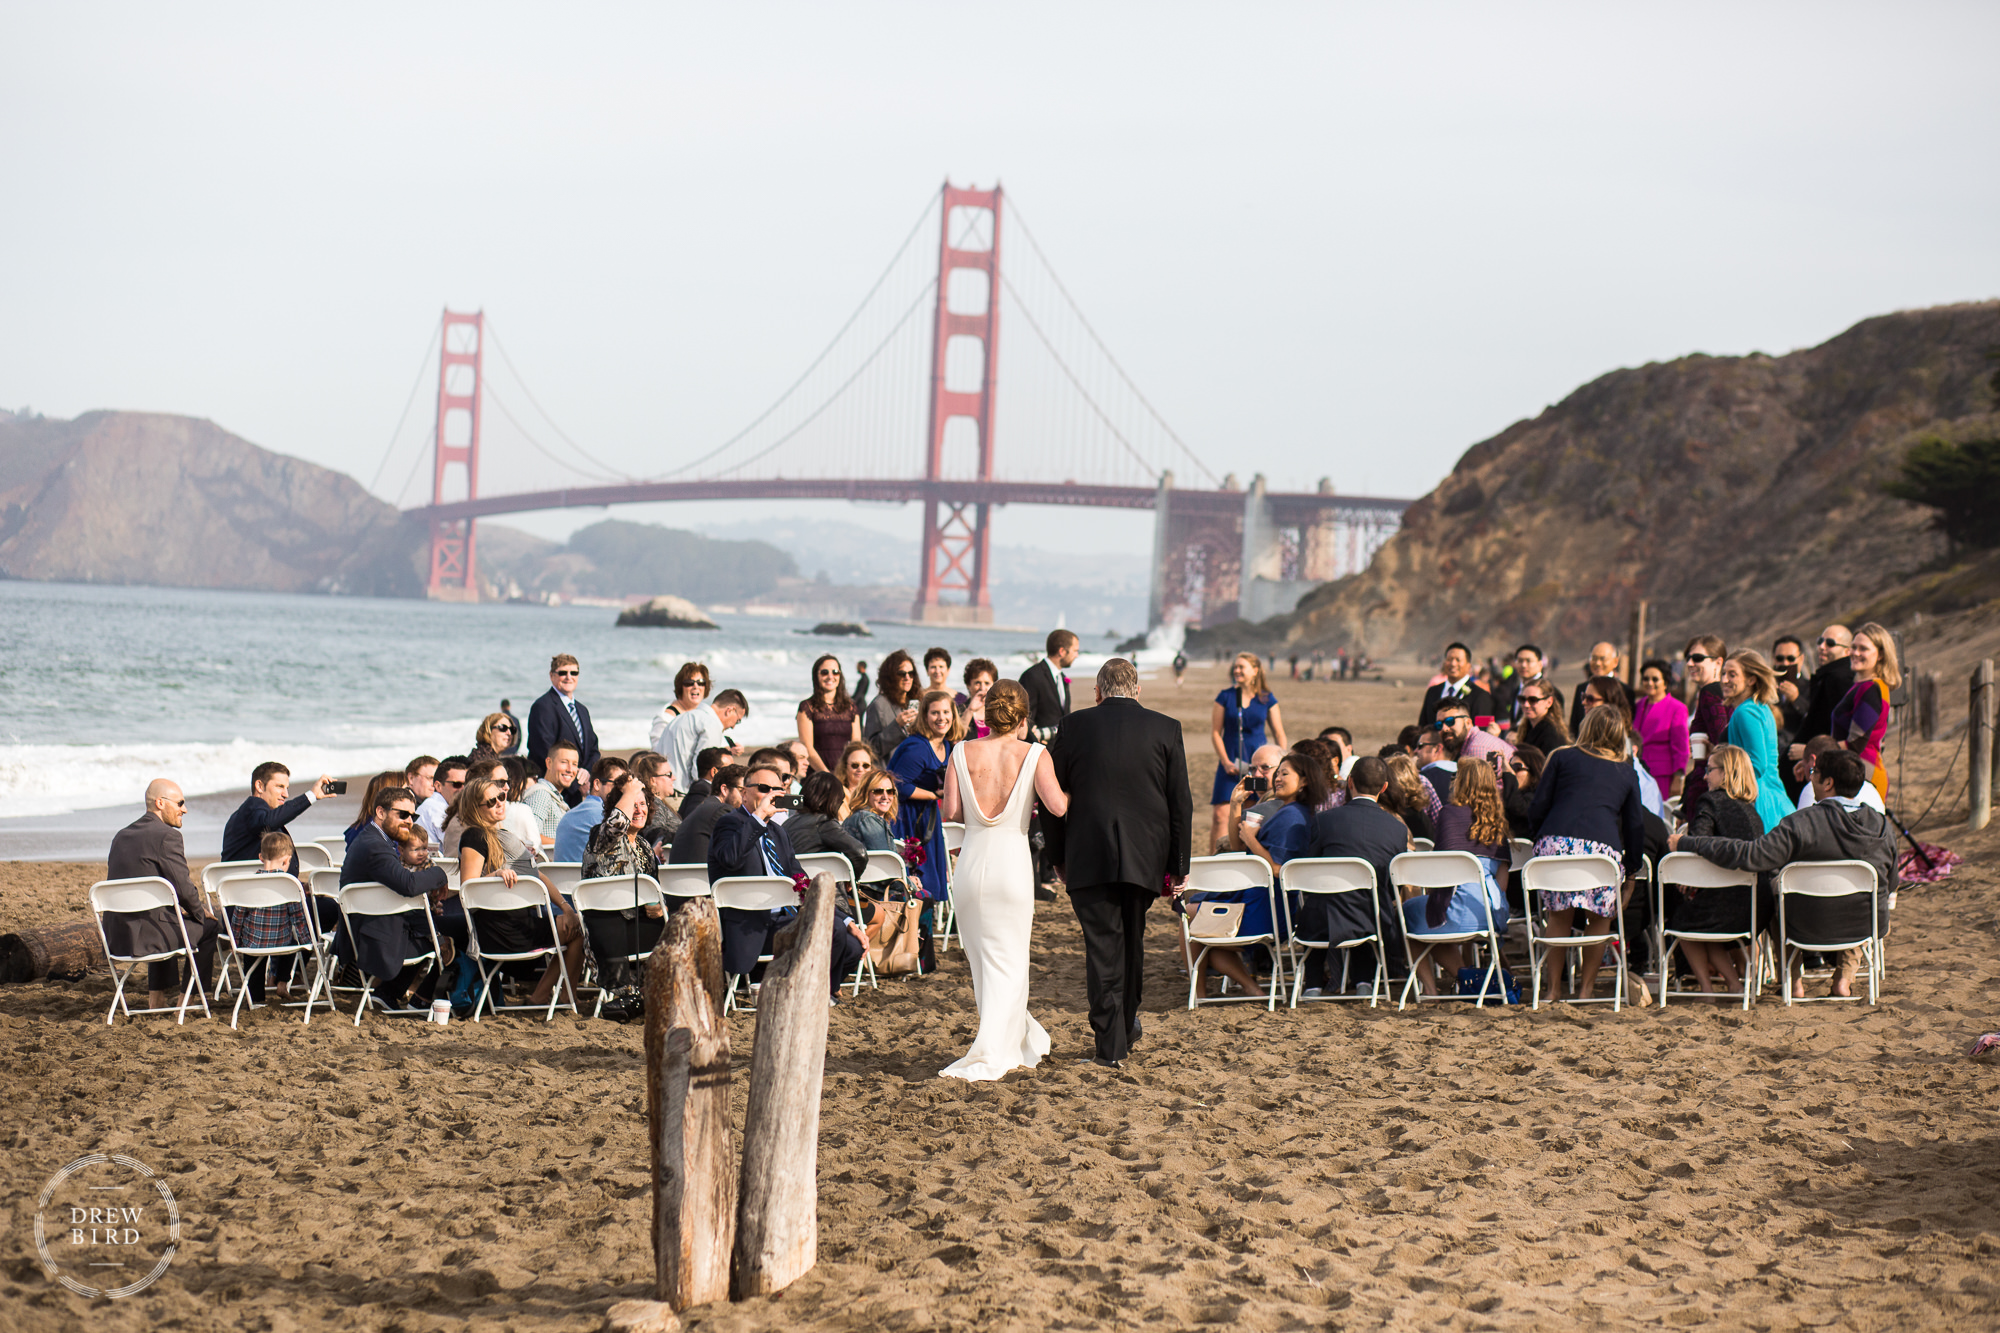 Bride and father walking down aisle. Baker Beach wedding ceremony in San Francisco with Golden Gate Bridge in background.